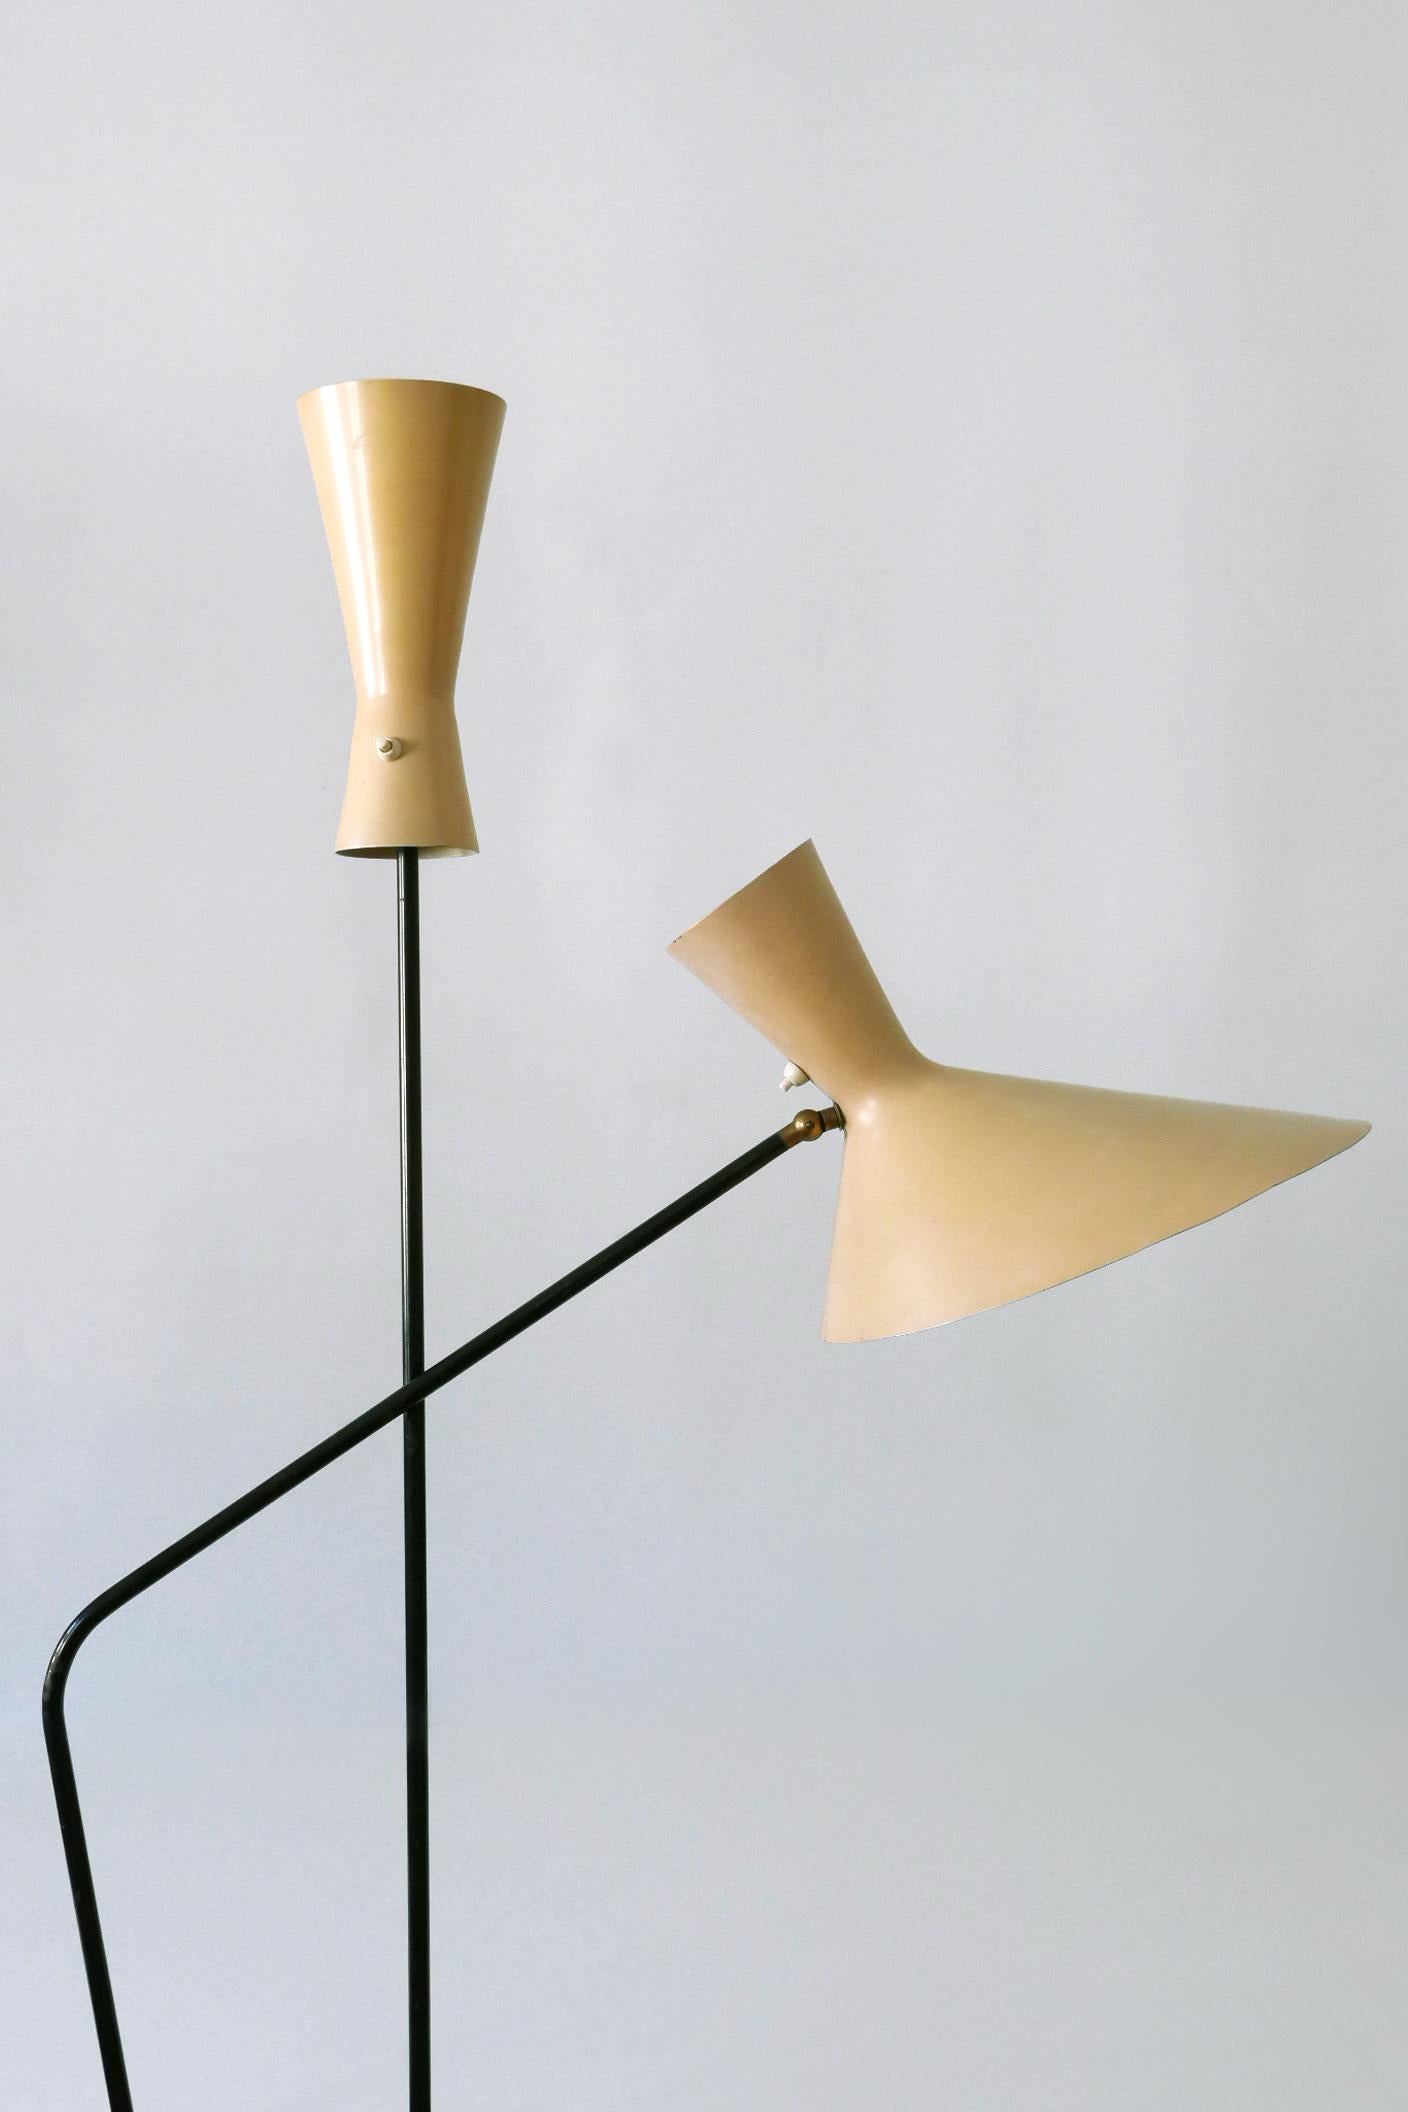 Swiss Rare Iconic Mid-Century Modern Floor Lamp by Prof. Carl Moor for BAG Turgi 1950s For Sale